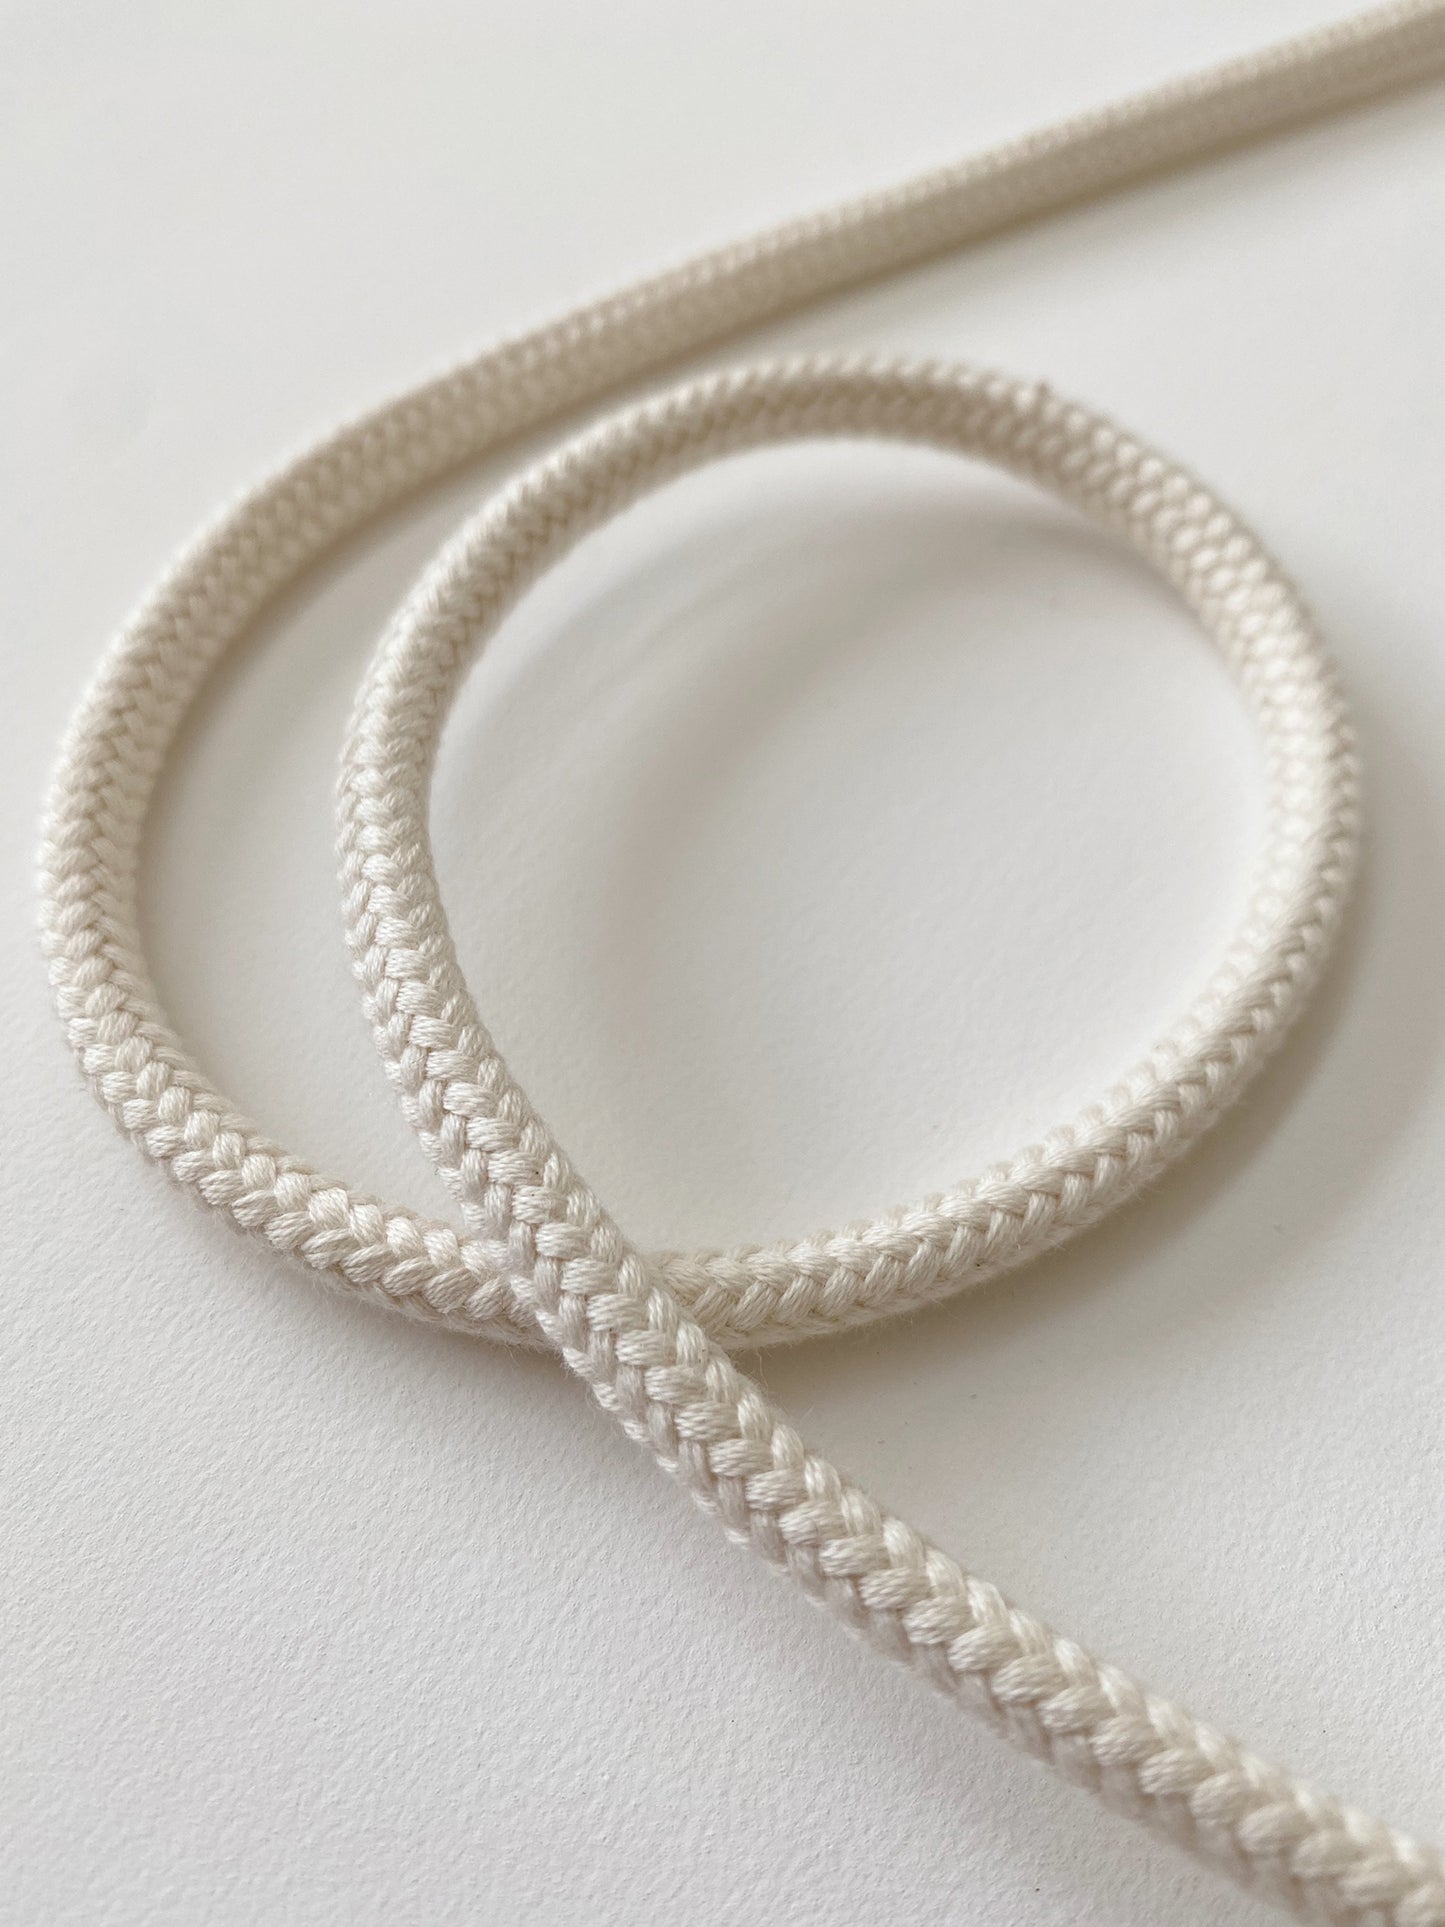 7mm Cord - 100% Cotton - Undyed